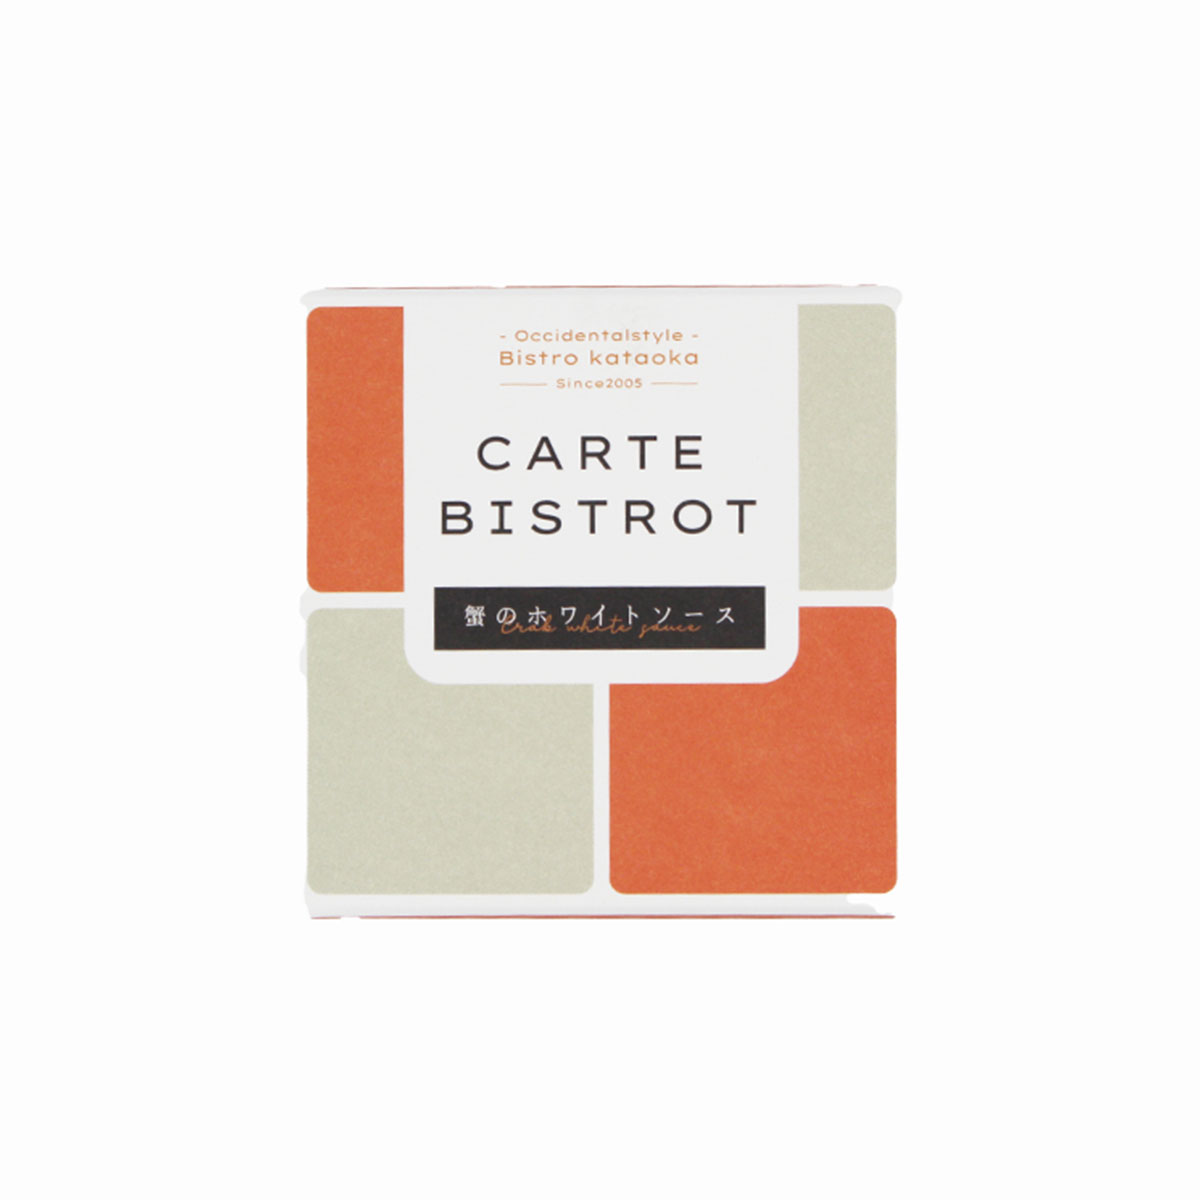 Carte bistrot - Canned Crab in White Sauce